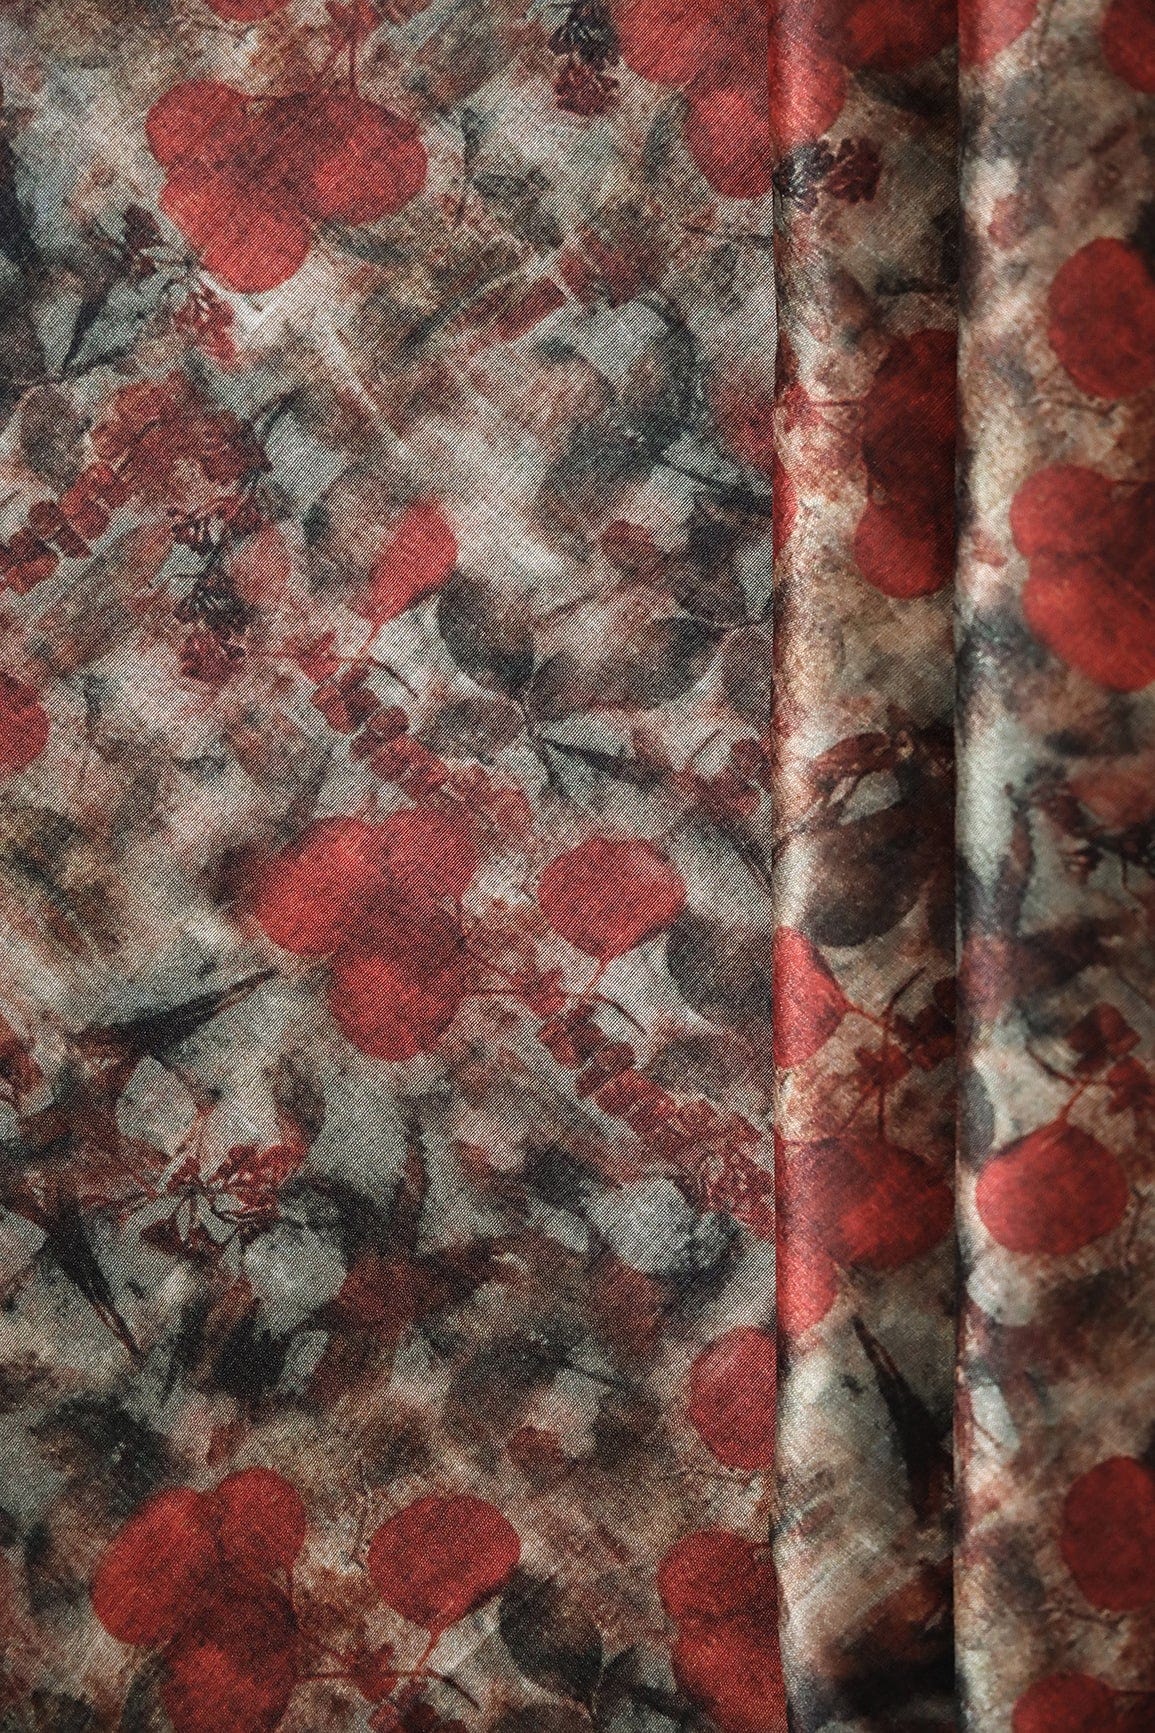 doeraa Prints Red And Black Floral Pattern Digital Print On Mulberry Silk Fabric